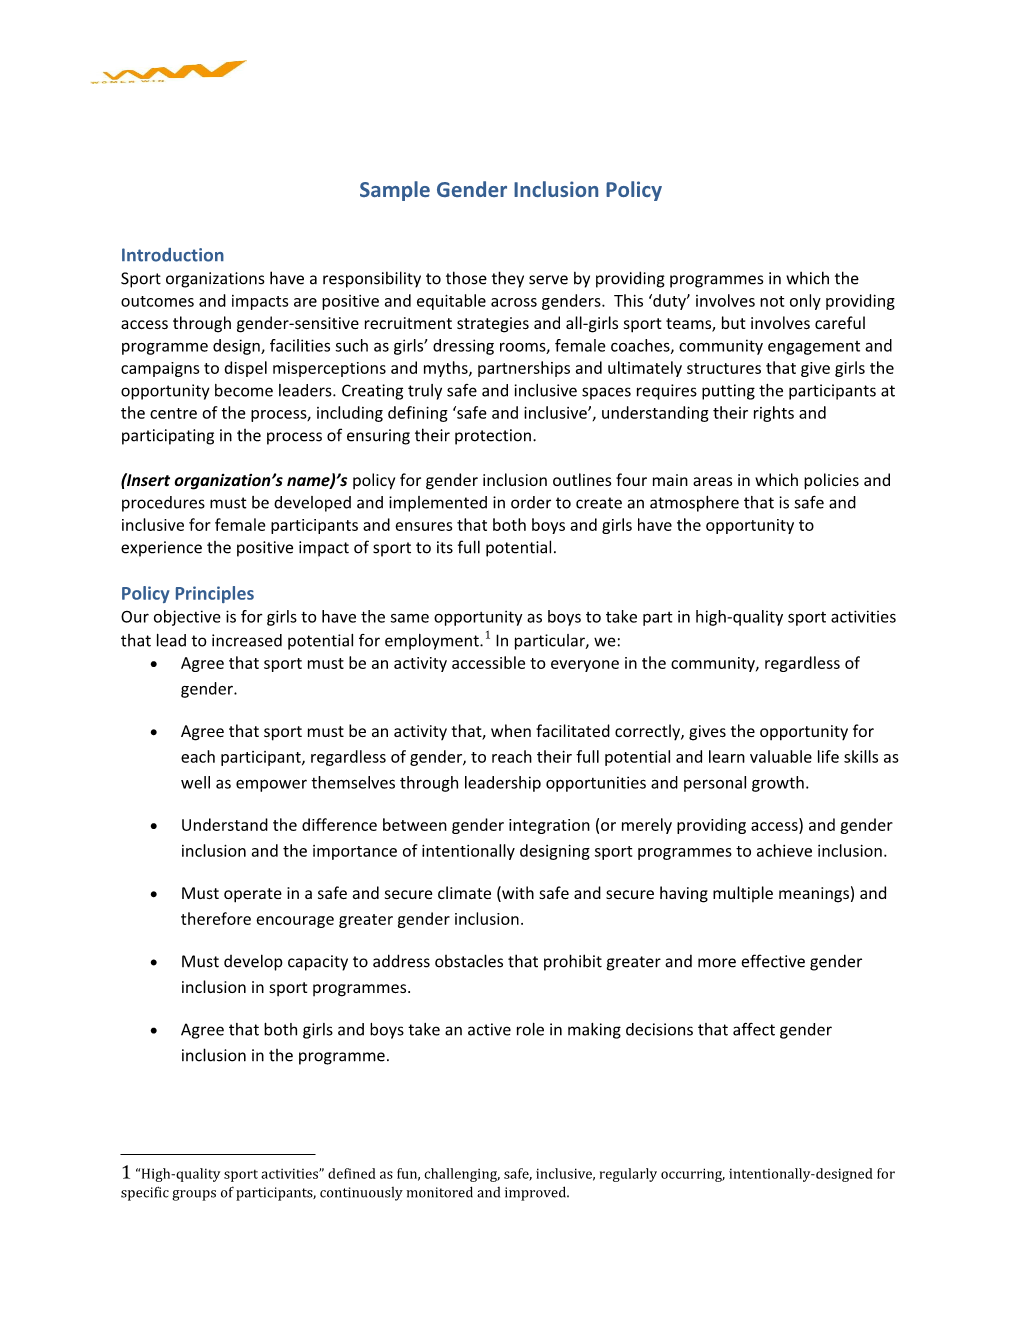 Sample Gender Inclusion Policy